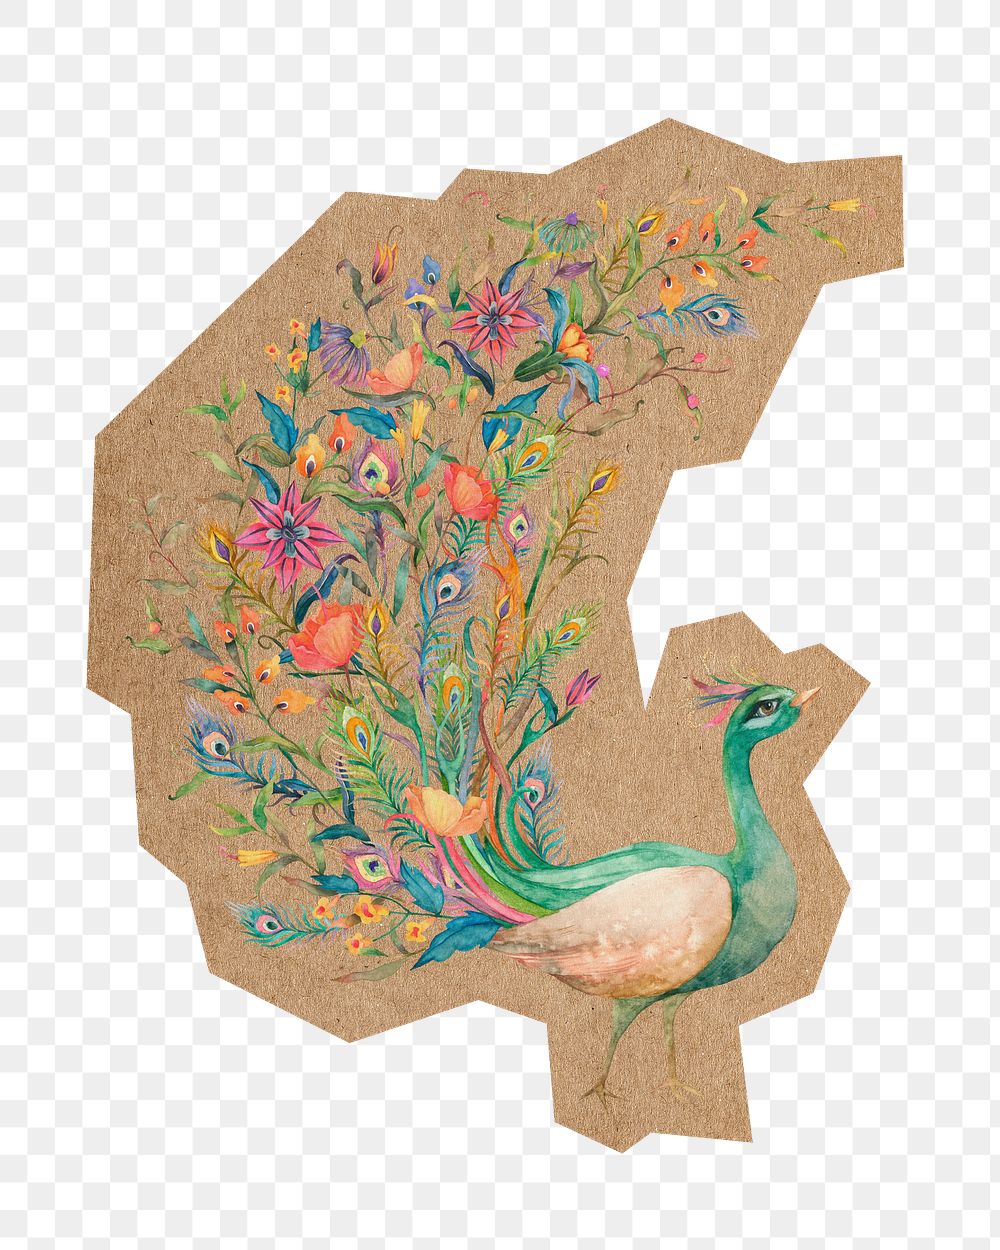 Peacock png, cut out paper element, transparent background